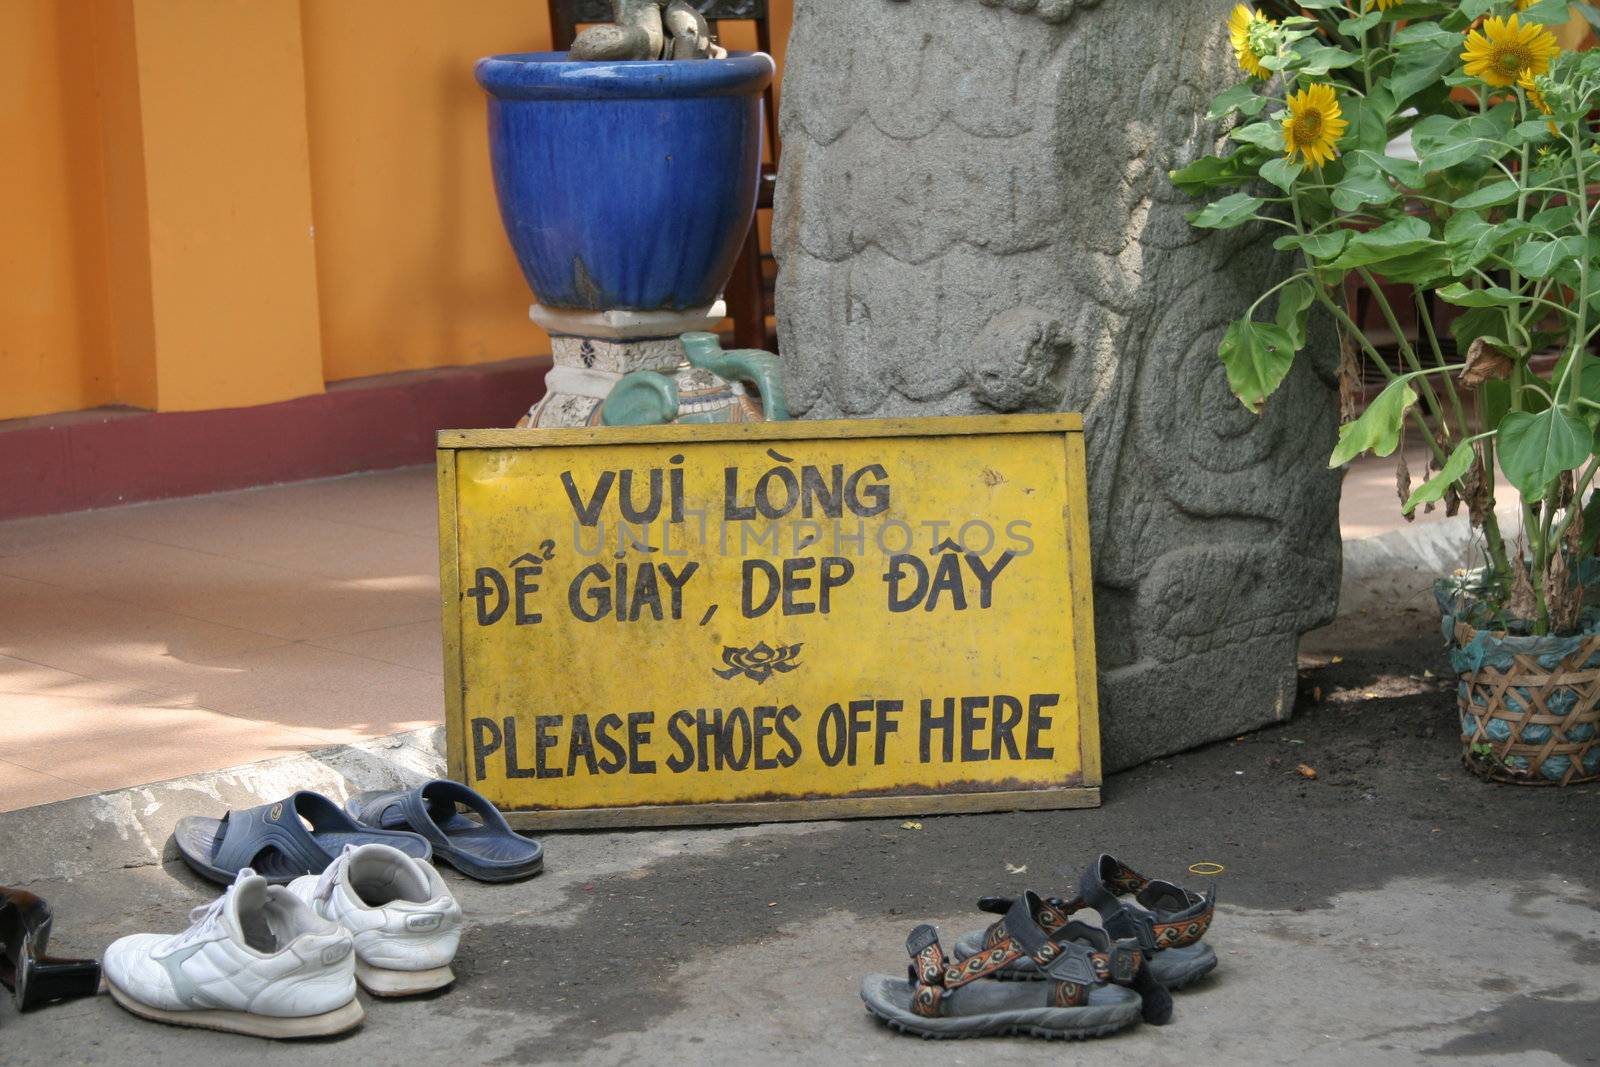 Temple entrance in Vietnam where the shoes have to be taken off before entering the temple